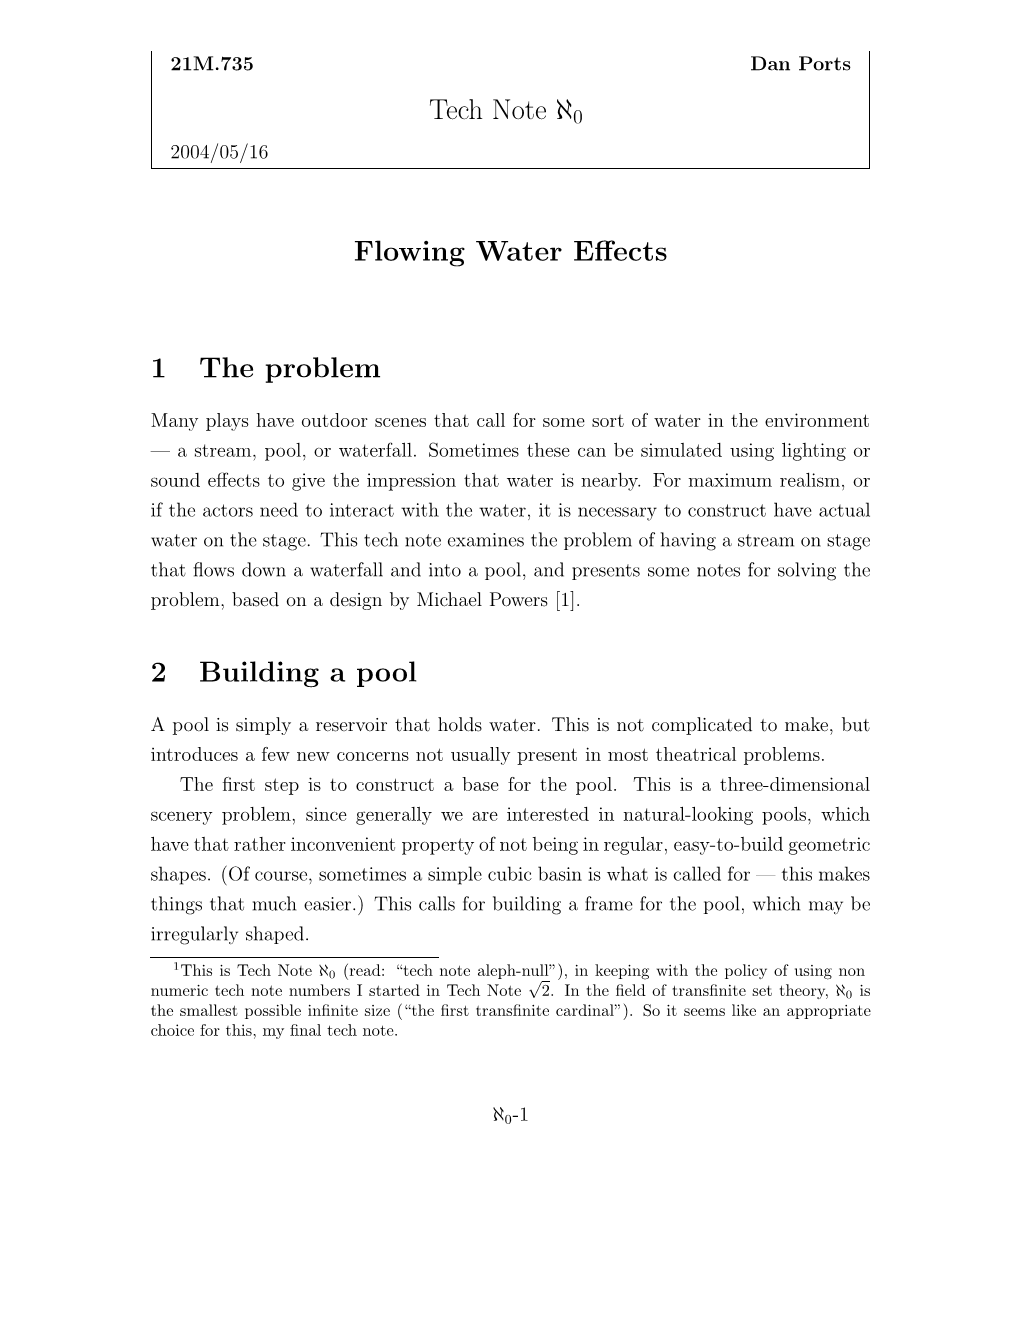 Tech Note ℵ0 Flowing Water Effects 1 the Problem 2 Building a Pool